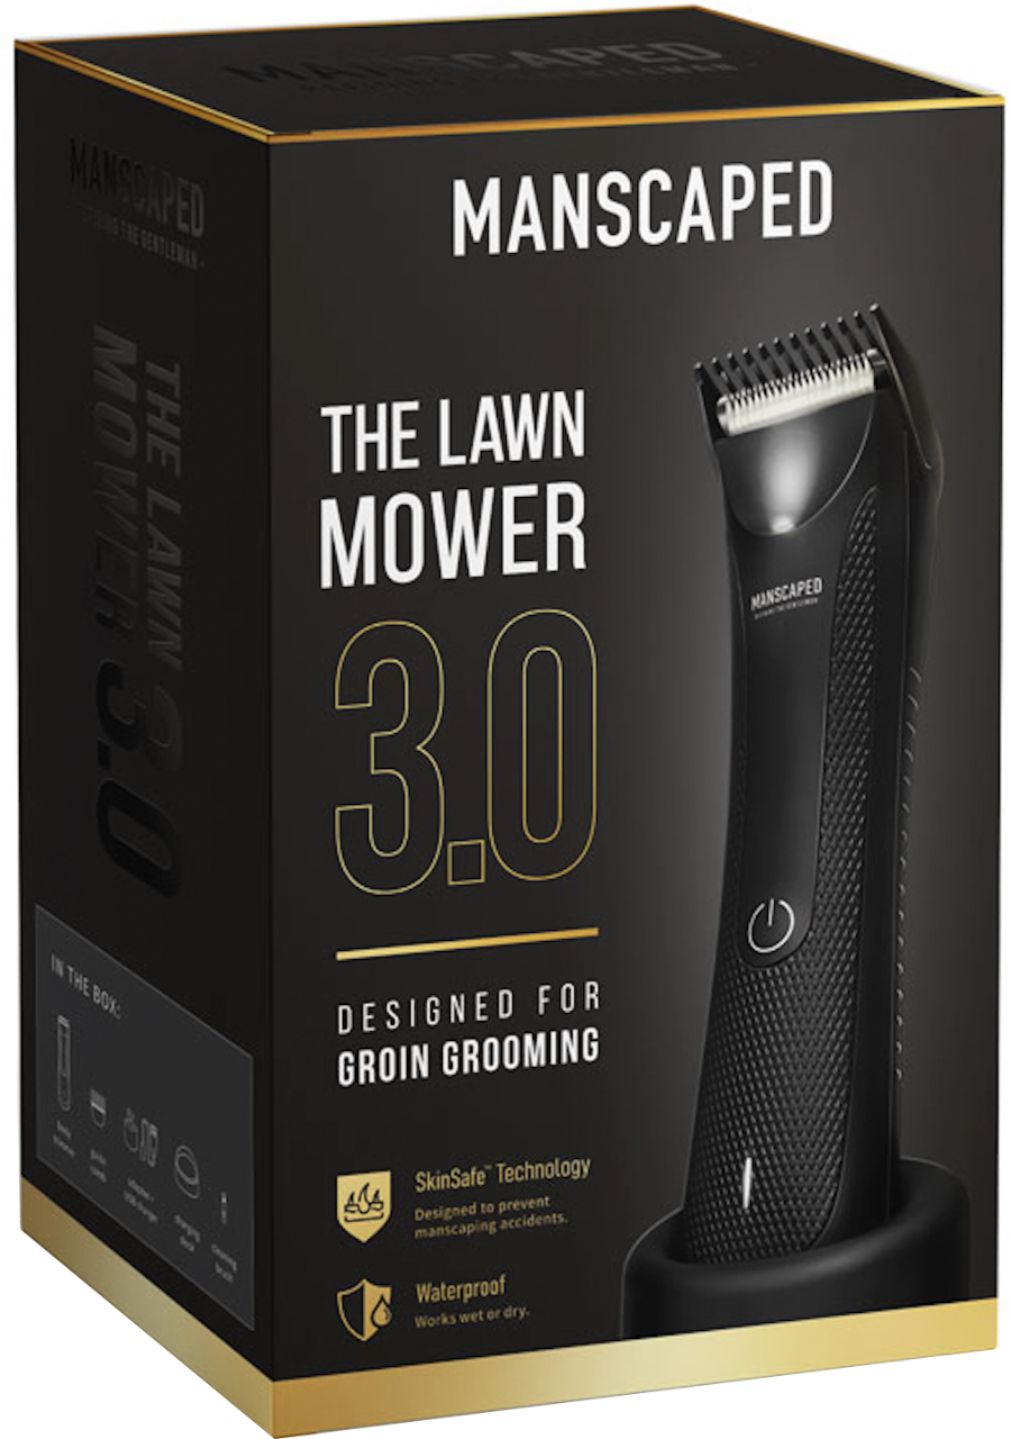 is the manscaped lawn mower 3.0 waterproof